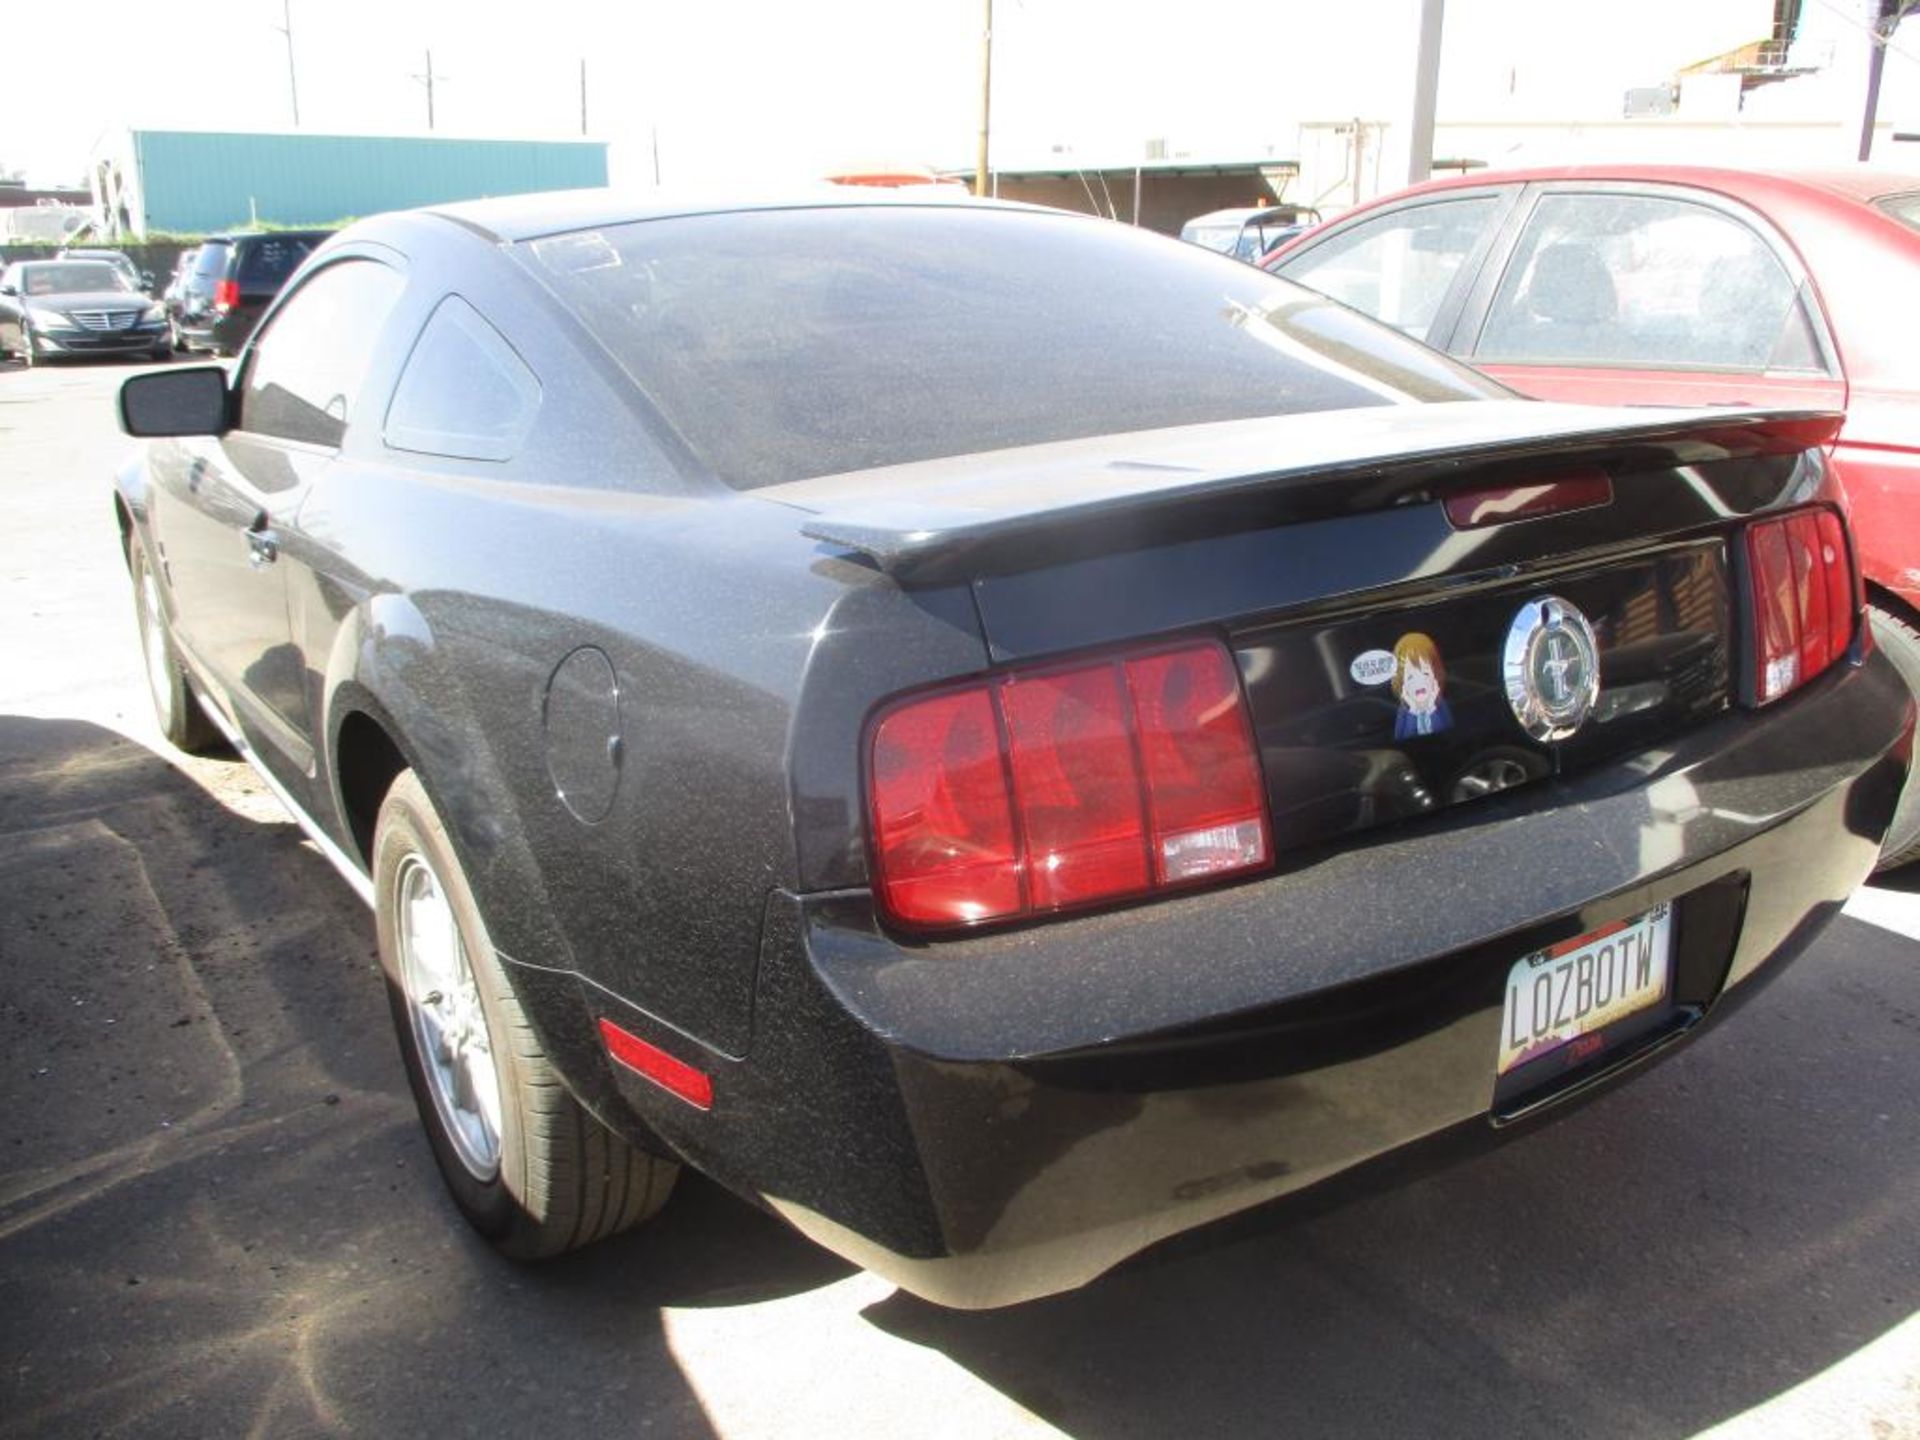 (Lot # 3322) 2007 Ford Mustang - Image 3 of 11